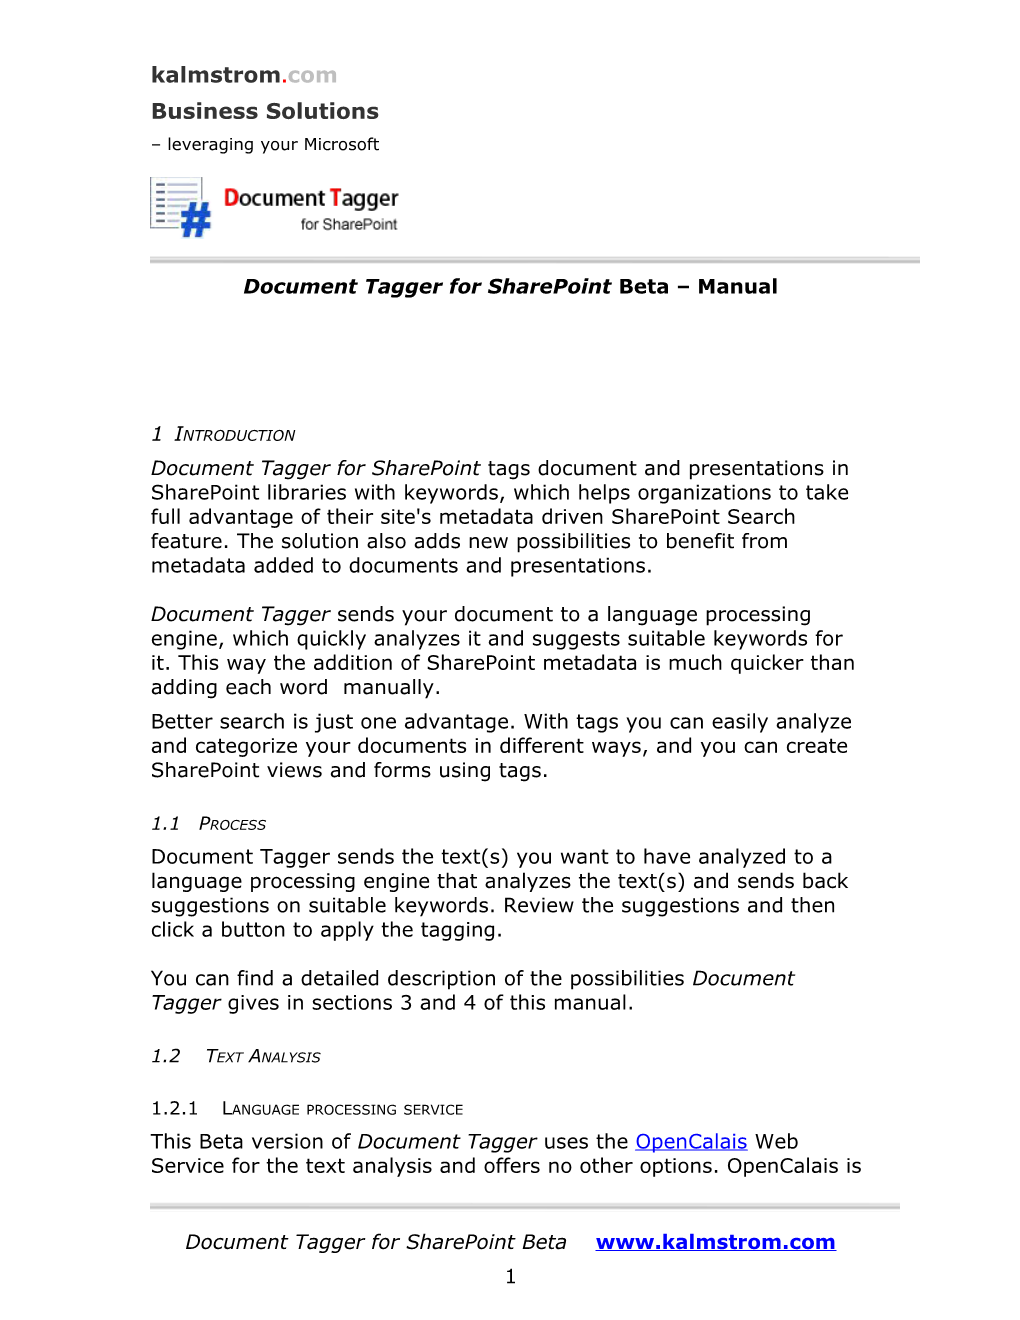 Sharepoint Document Tagger Manual